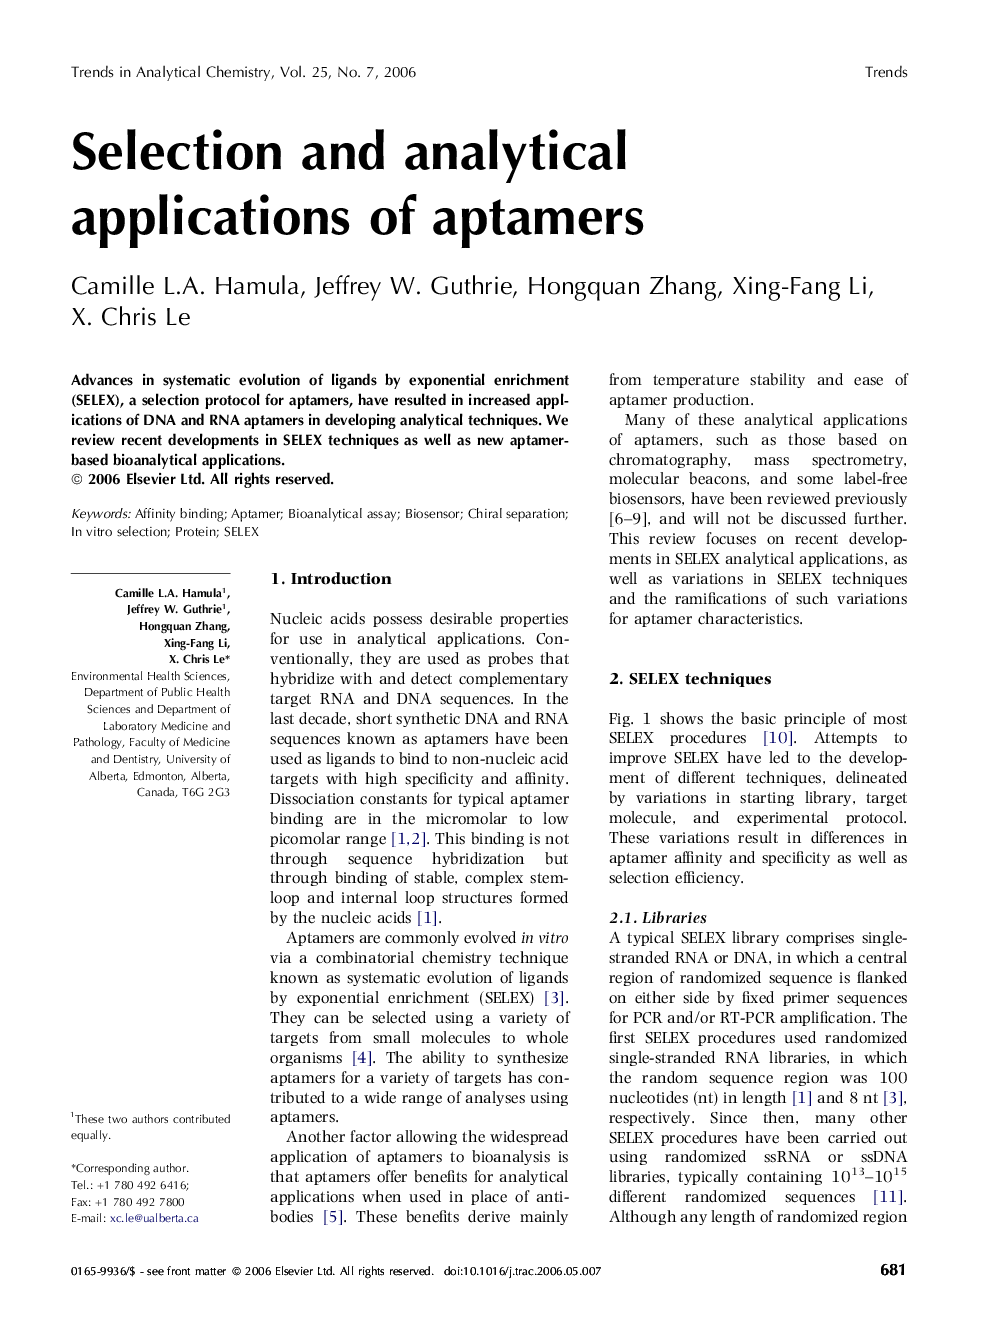 Selection and analytical applications of aptamers